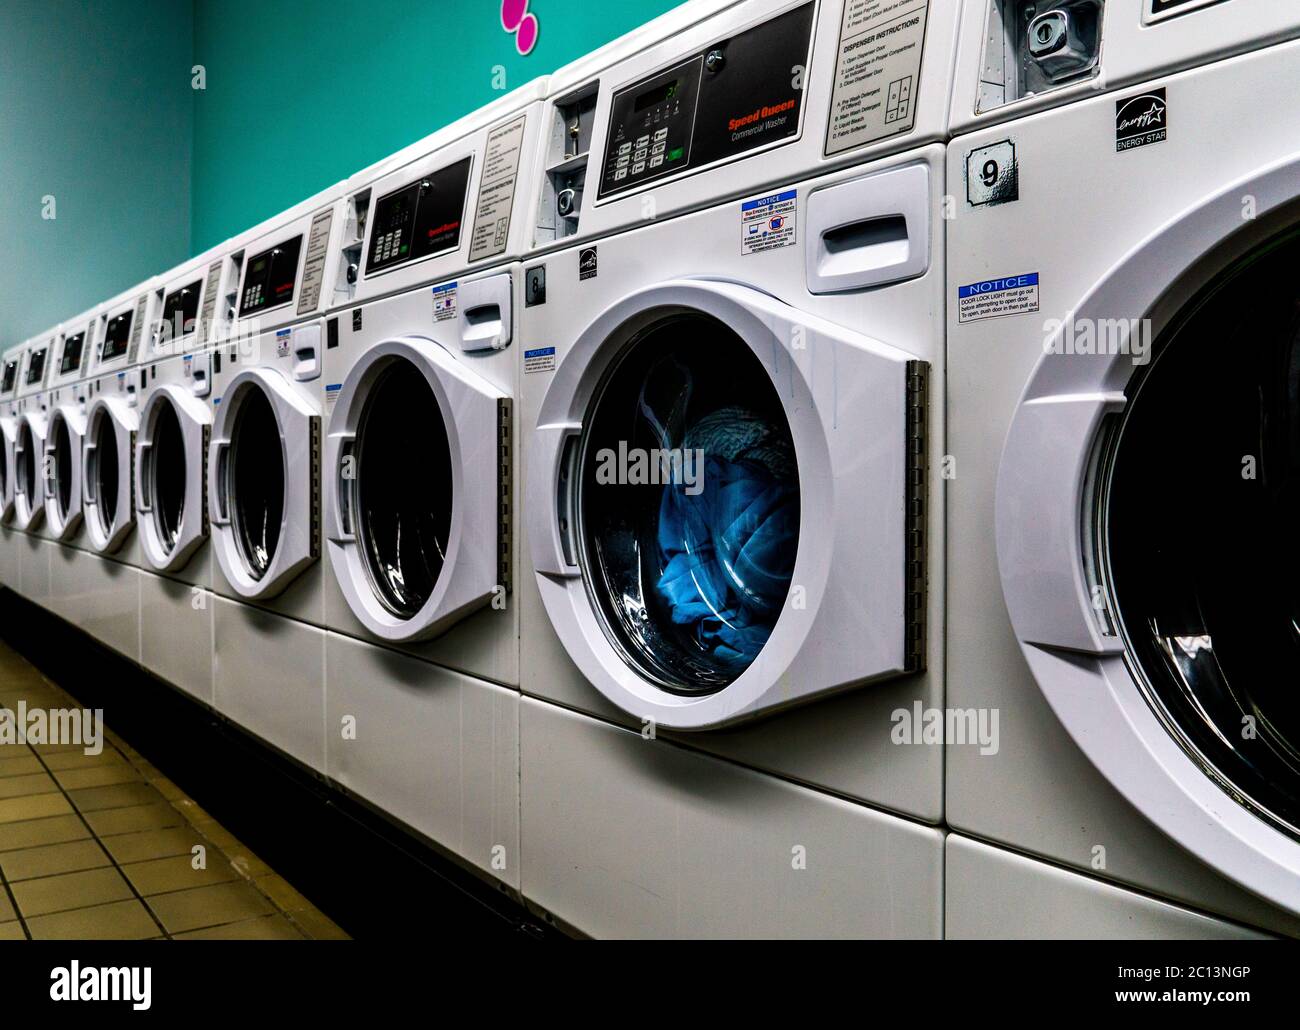 Laundromat line of white washing machines with laundry in them and is empty with teal wall and tile floor. Stock Photo